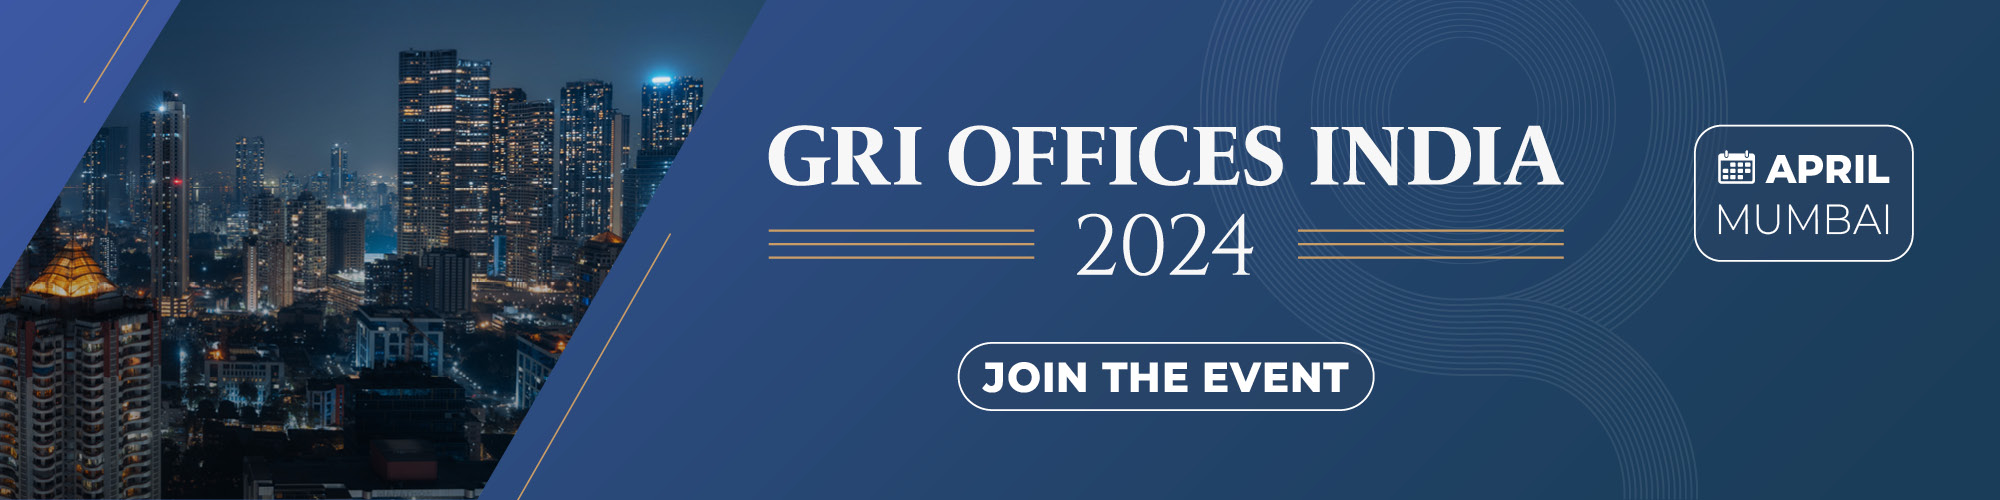 GRI Offices India 2024